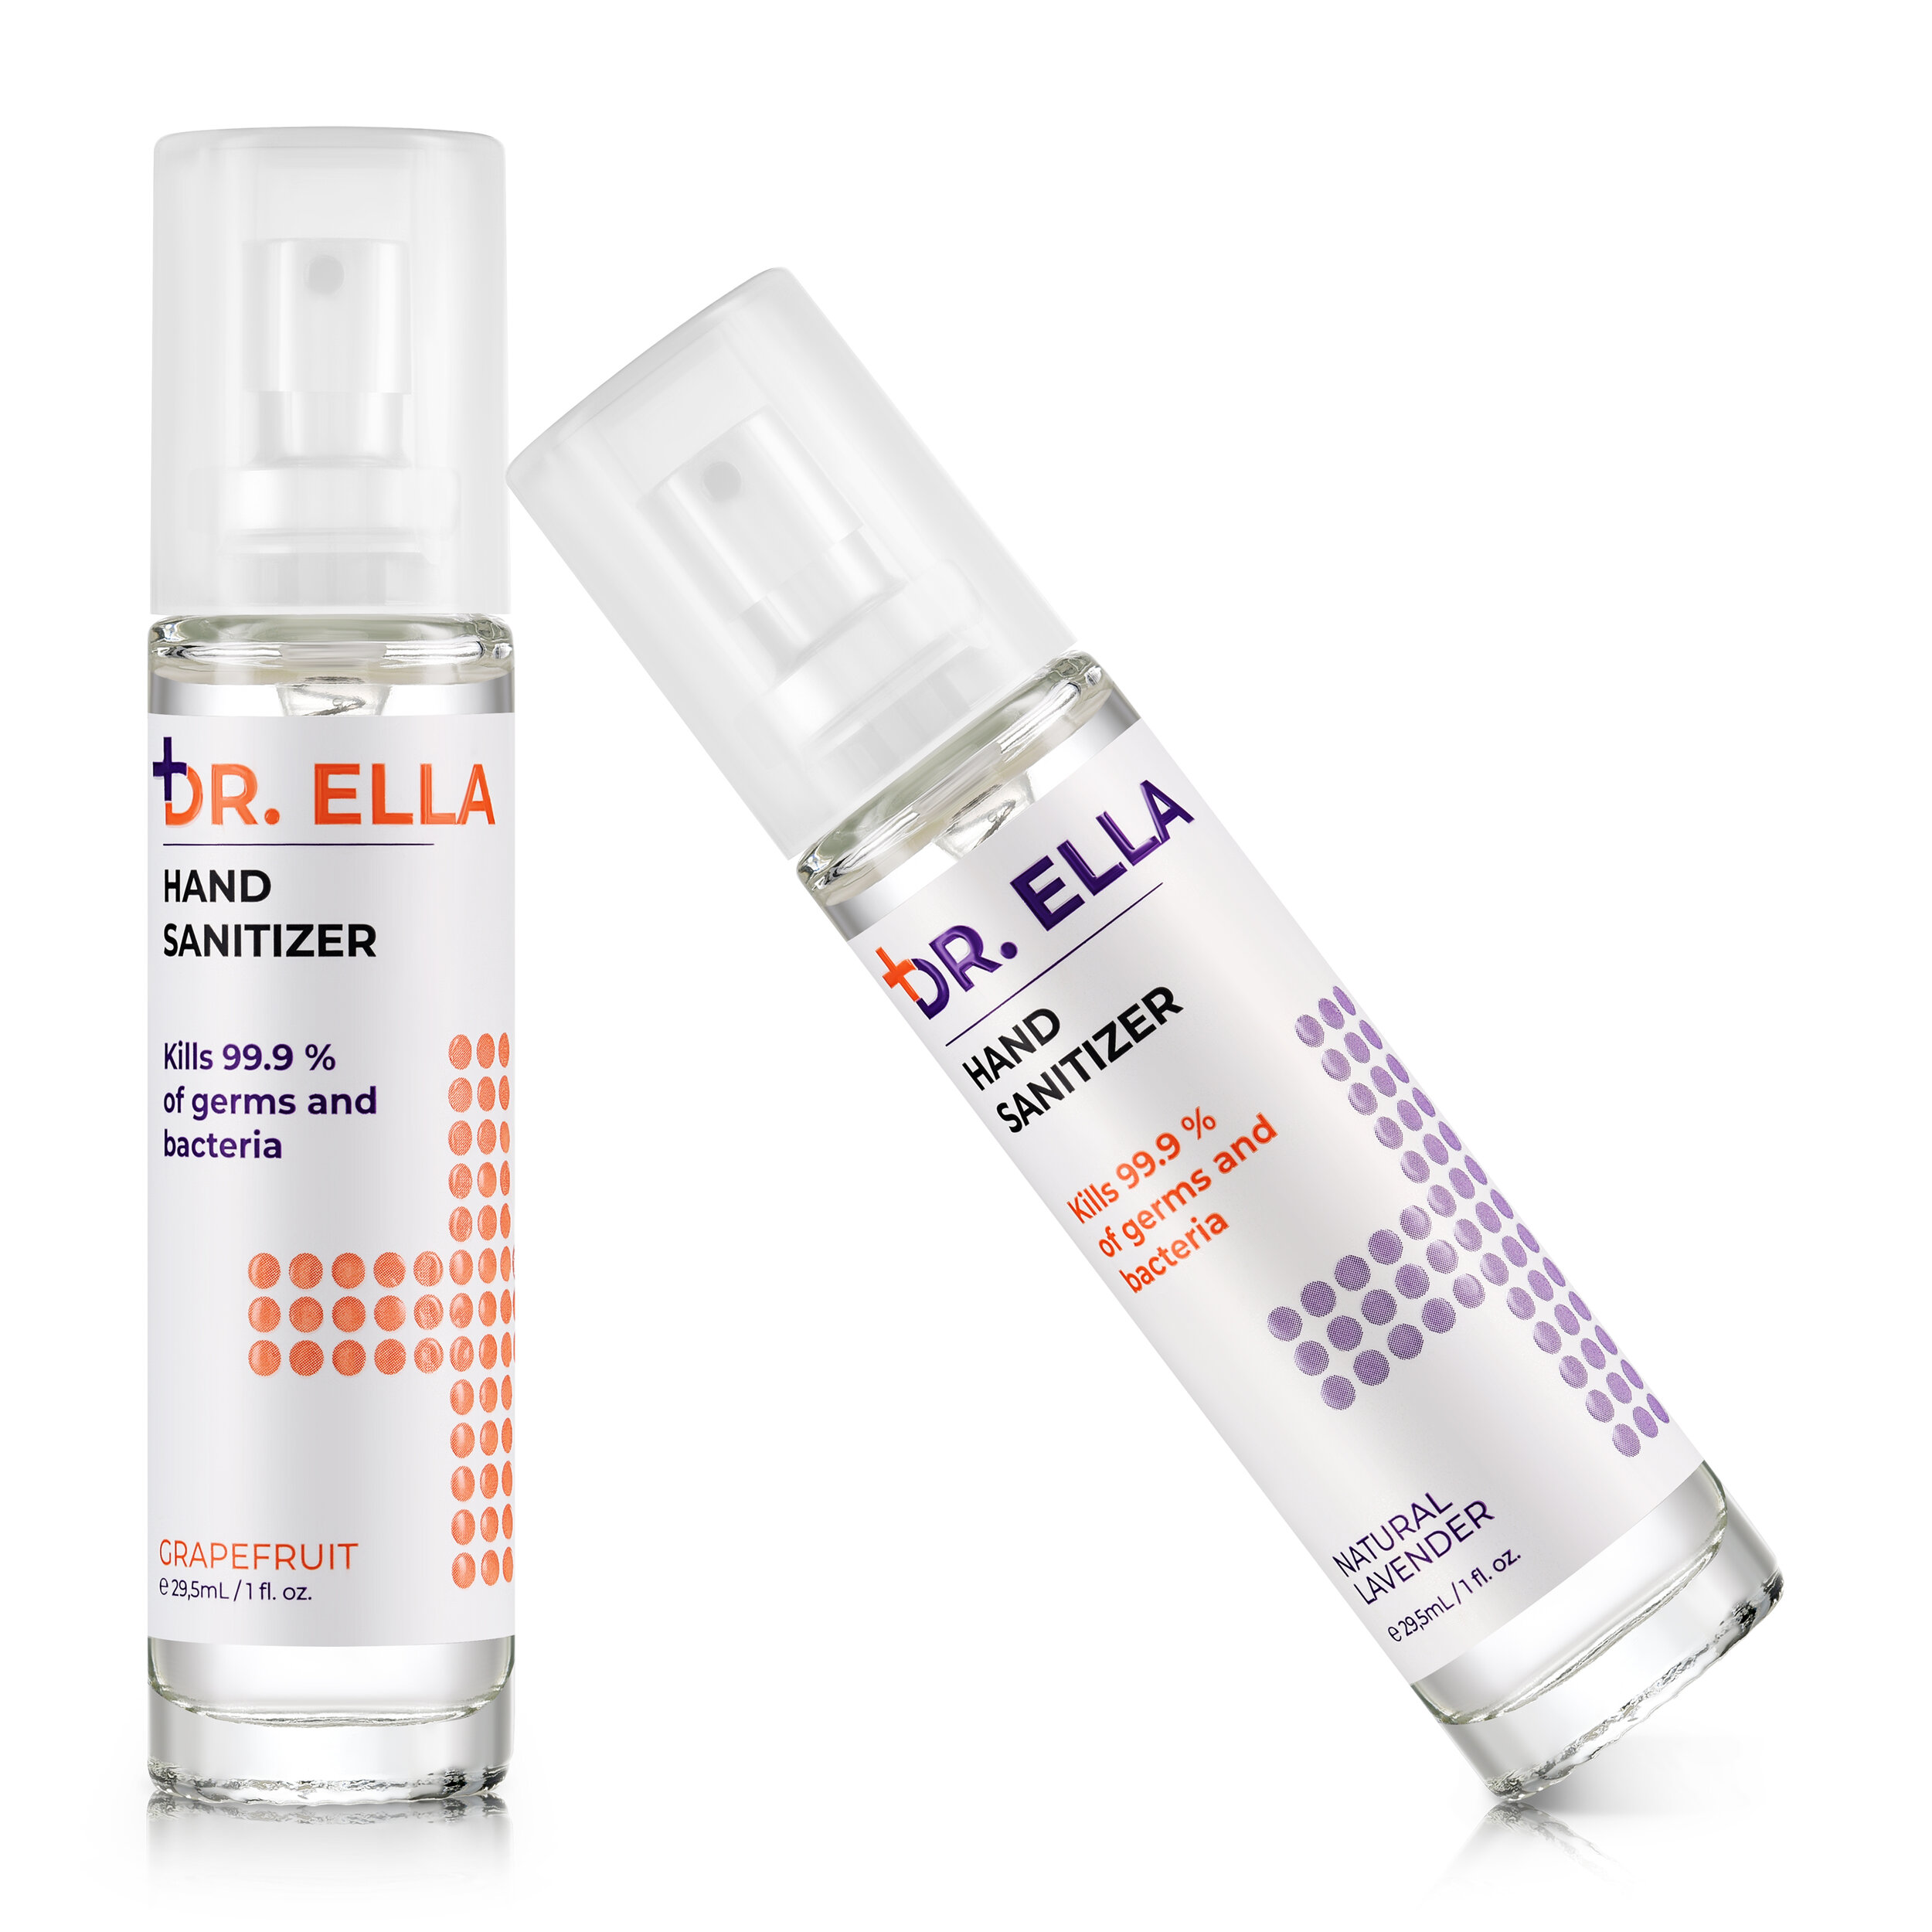 Dr Ella Hand Sanitizer: A Family Business and Story